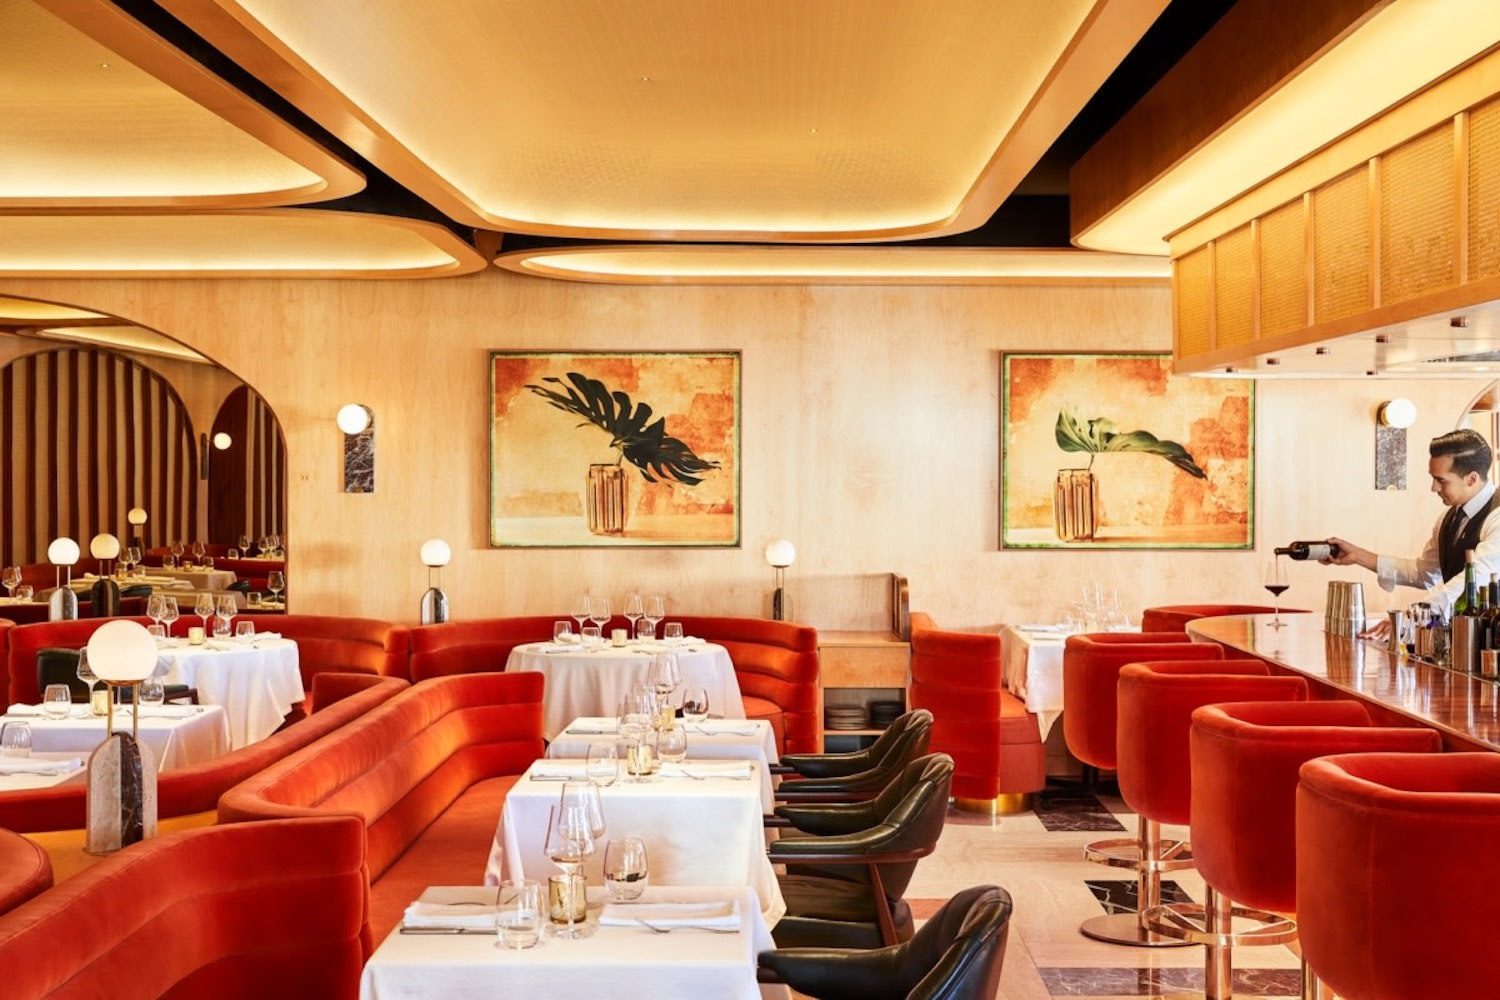 Interior of a restaurant with red and yellow hues.